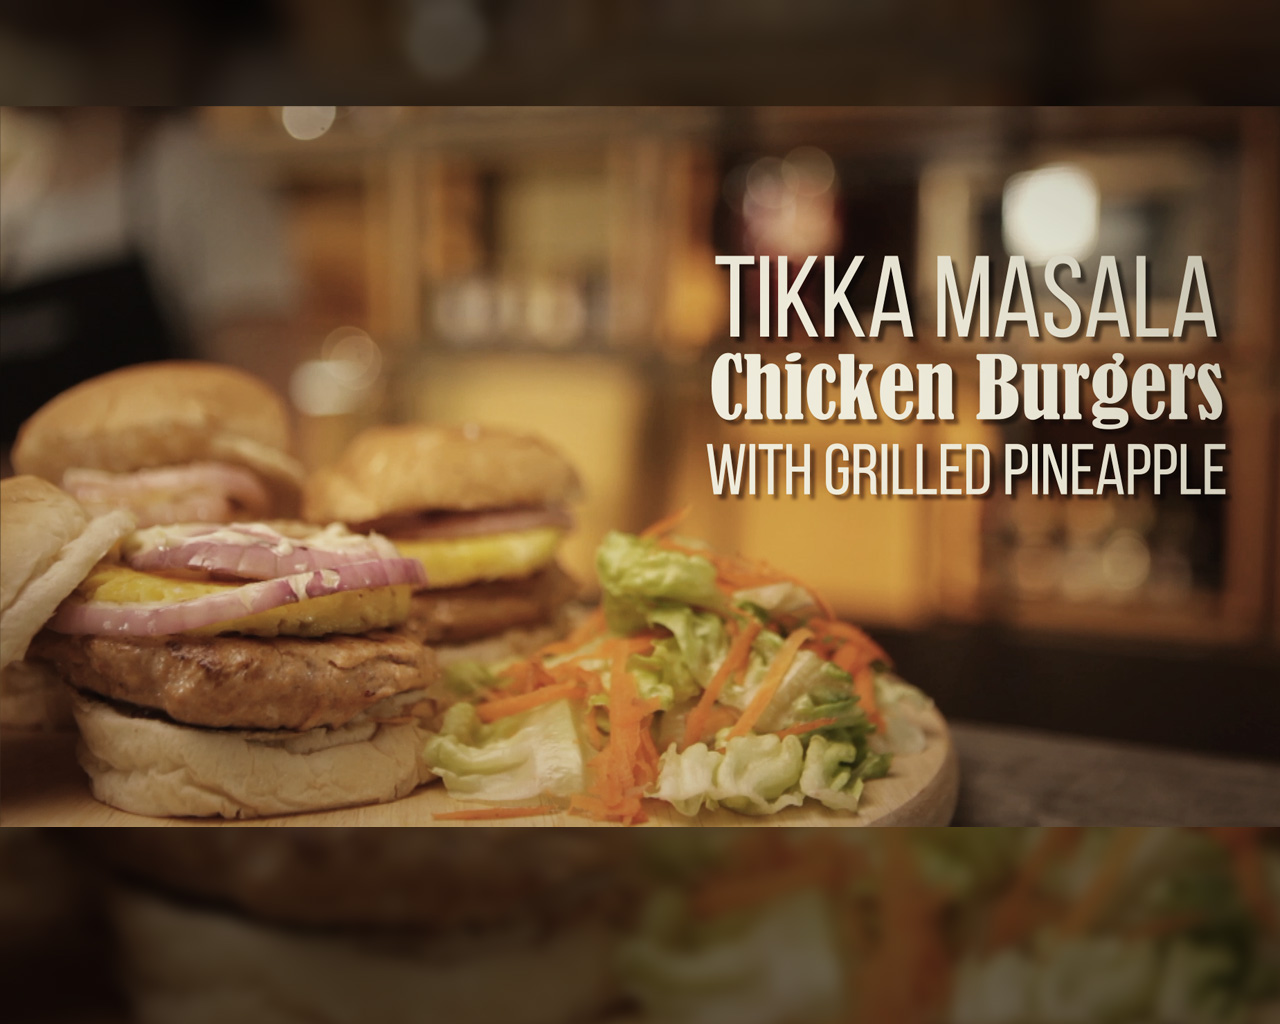 Tikka Masala Chicken Burgers with Grilled Pineapple